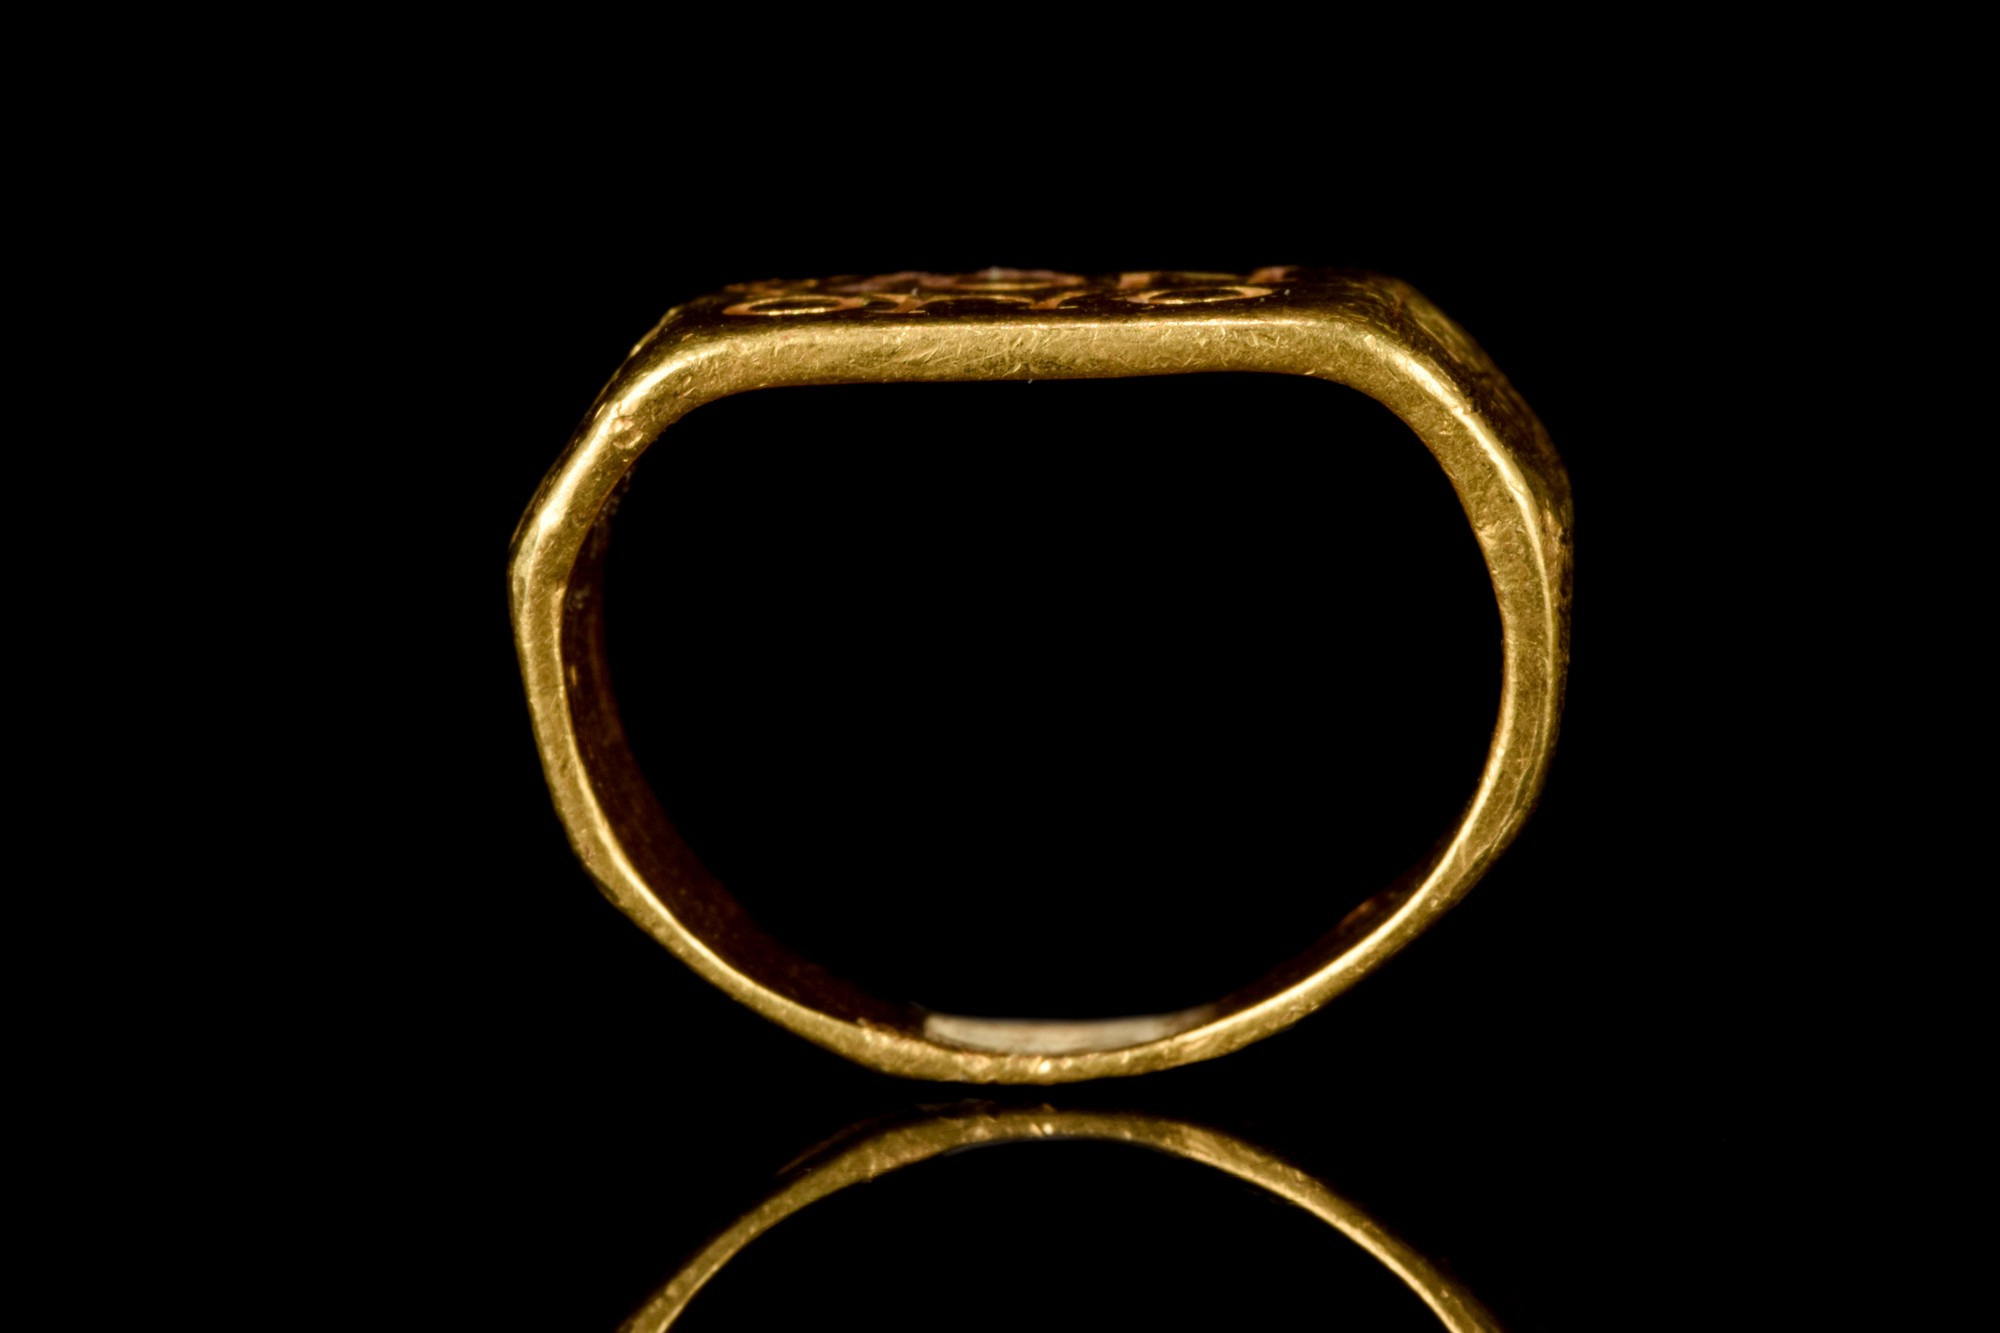 BYZANTINE GOLD MARRIAGE RING WITH OMONIA INSCRIPTION - Image 6 of 6